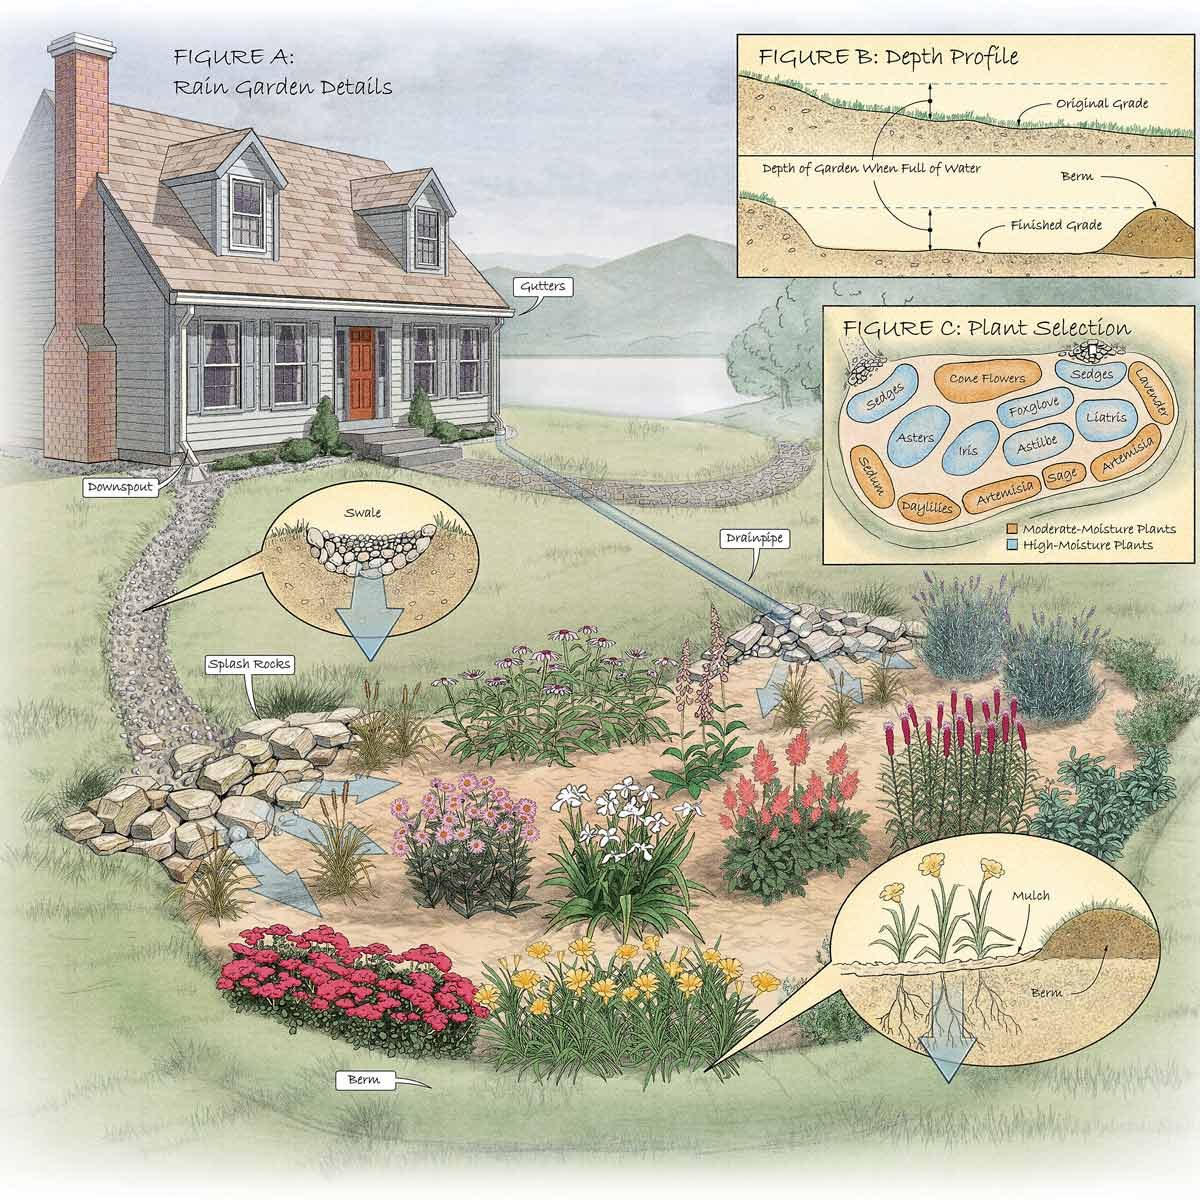 A complete guide to building and maintaining a rain garden